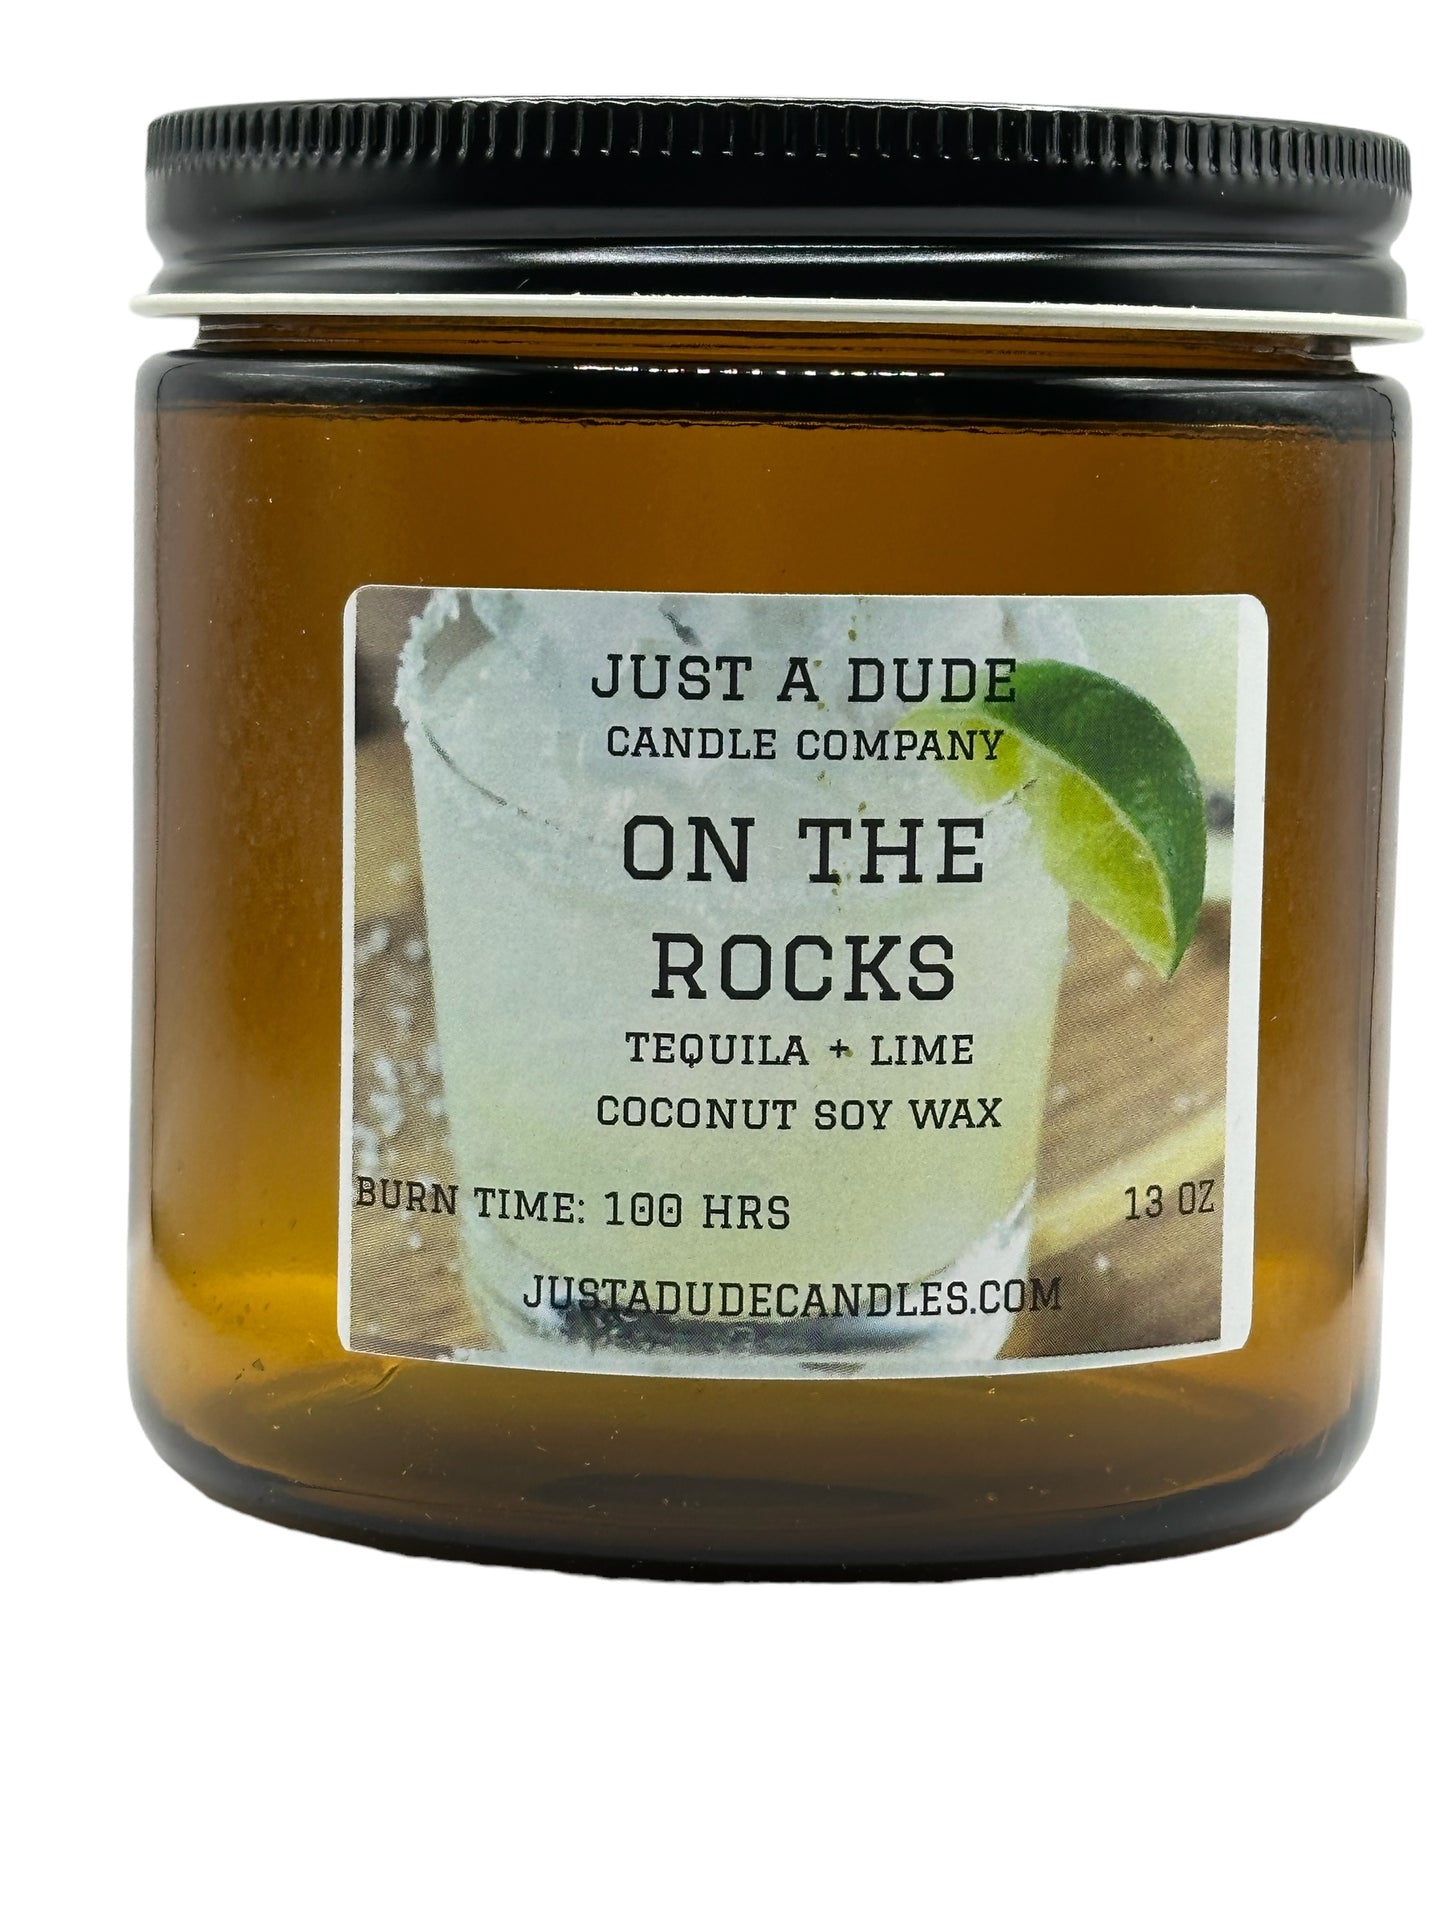 ON THE ROCKS (TEQUILA + LIME + SEA SALT) AMBER JAR COLLECTION